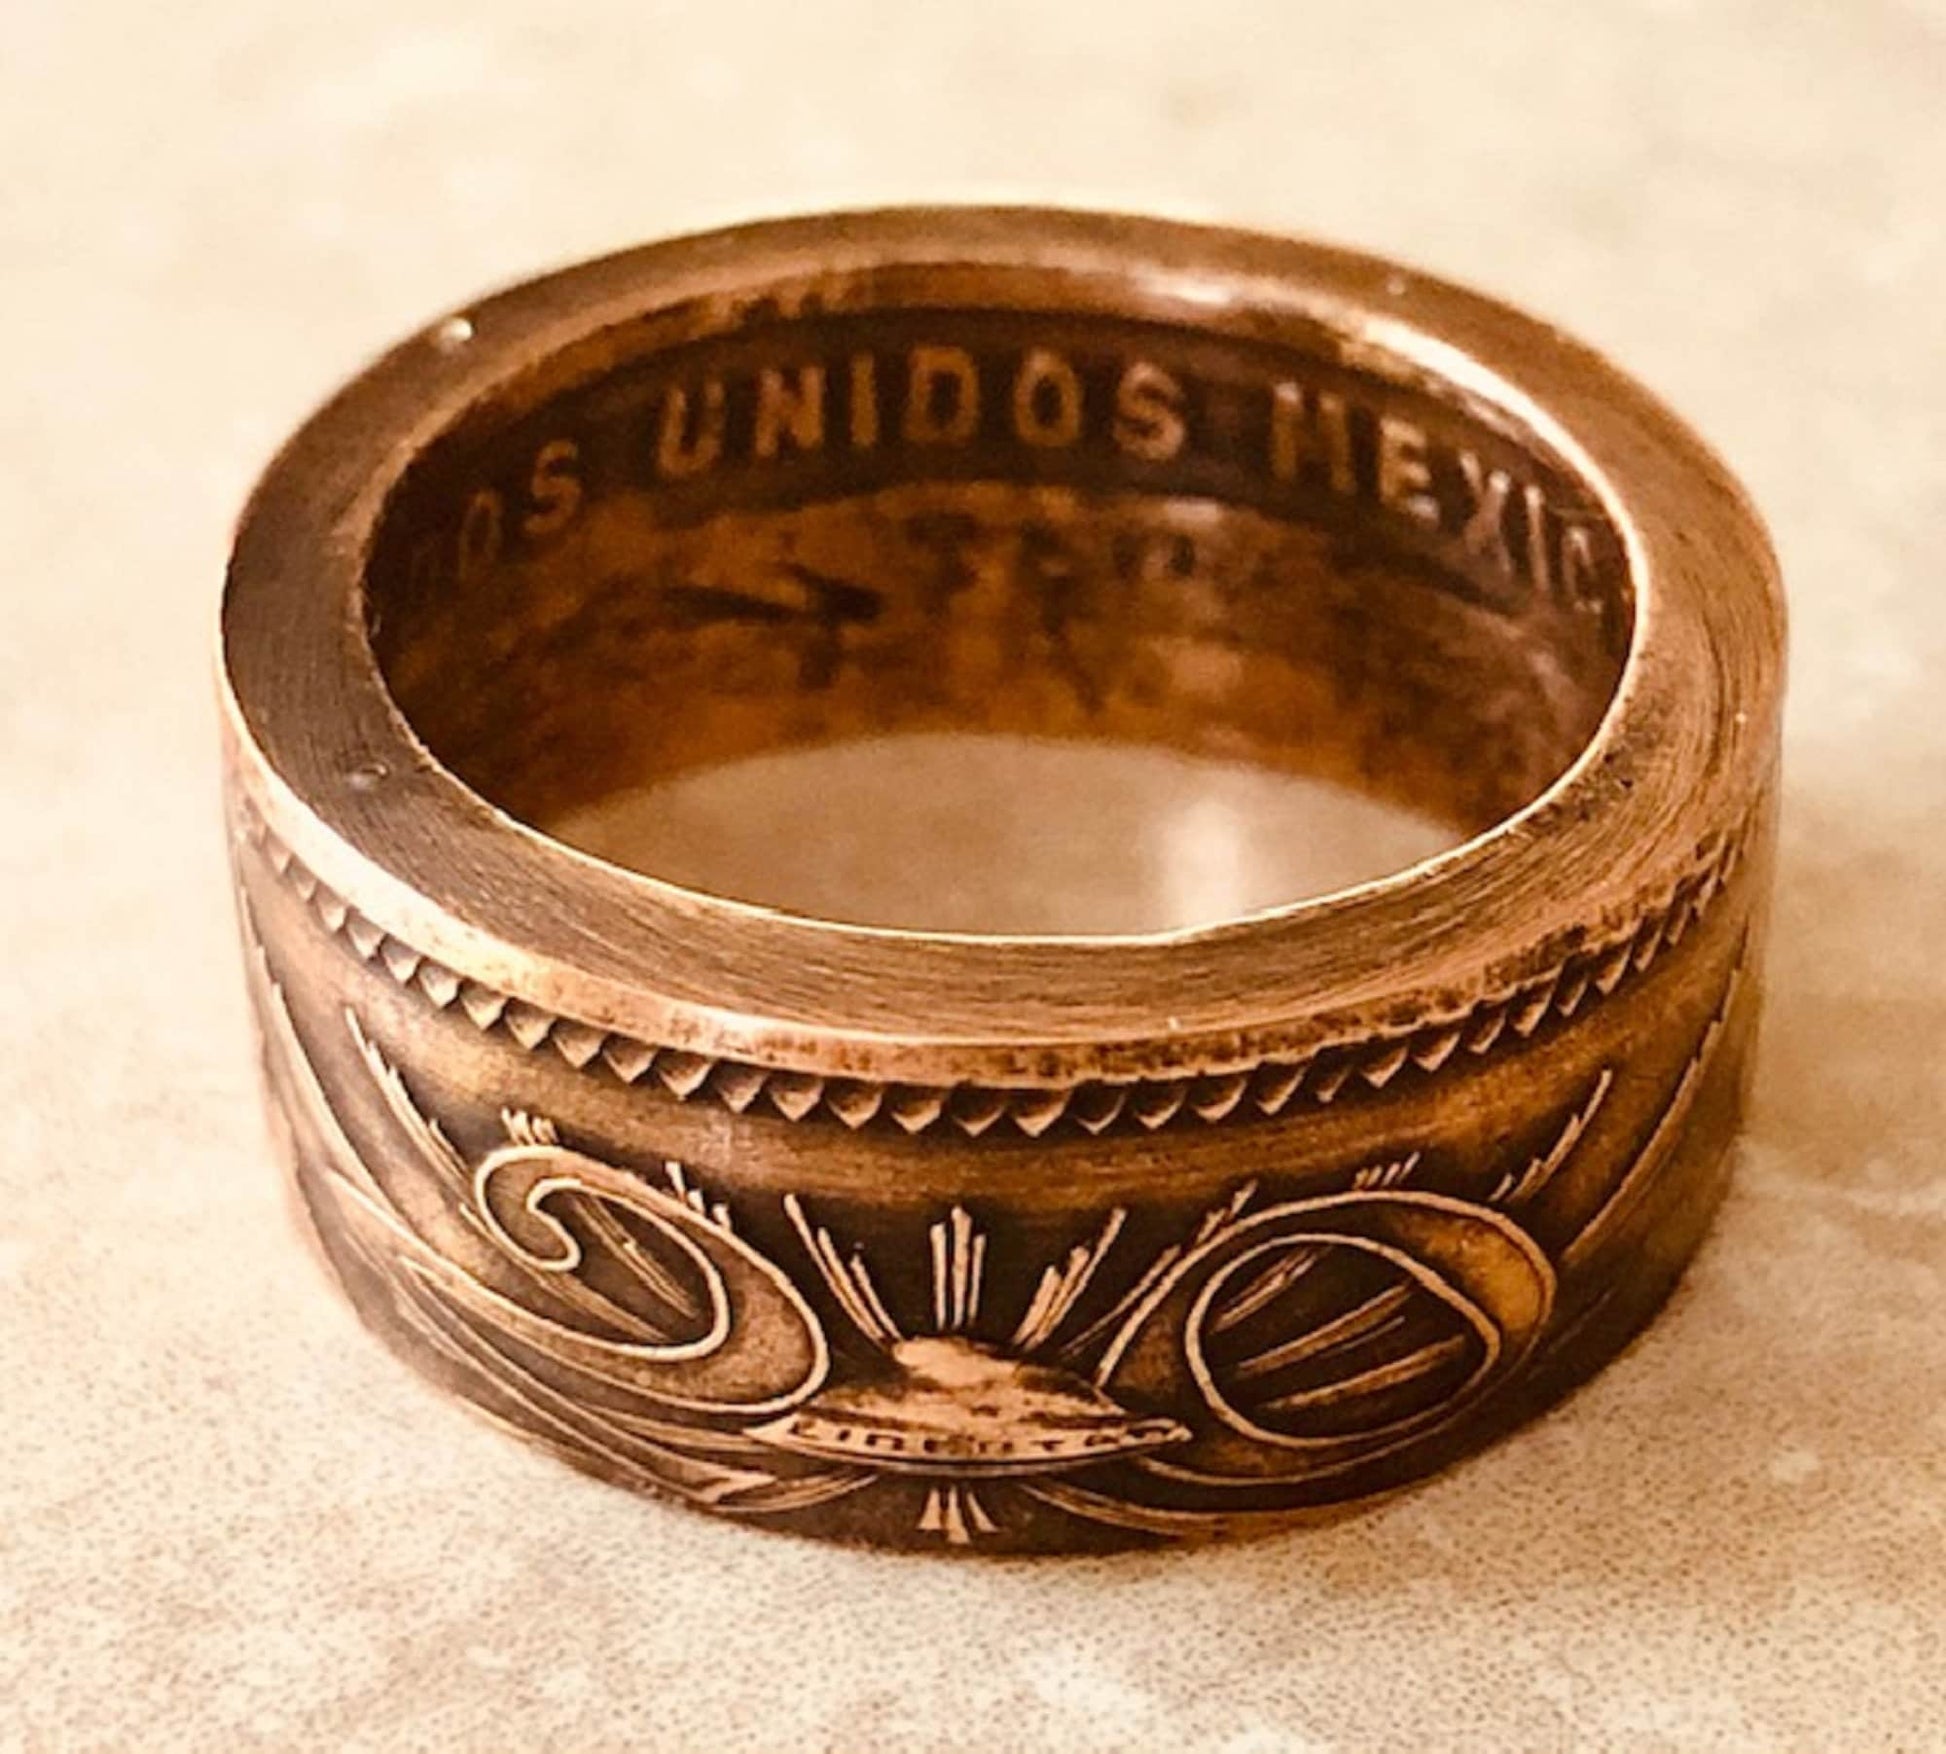 Mexico Ring 20 Centavos Mexican Ring Vintage Handmade Jewelry Gift Charm For Friend Coin Ring Gift For Him Her World Coin Collector